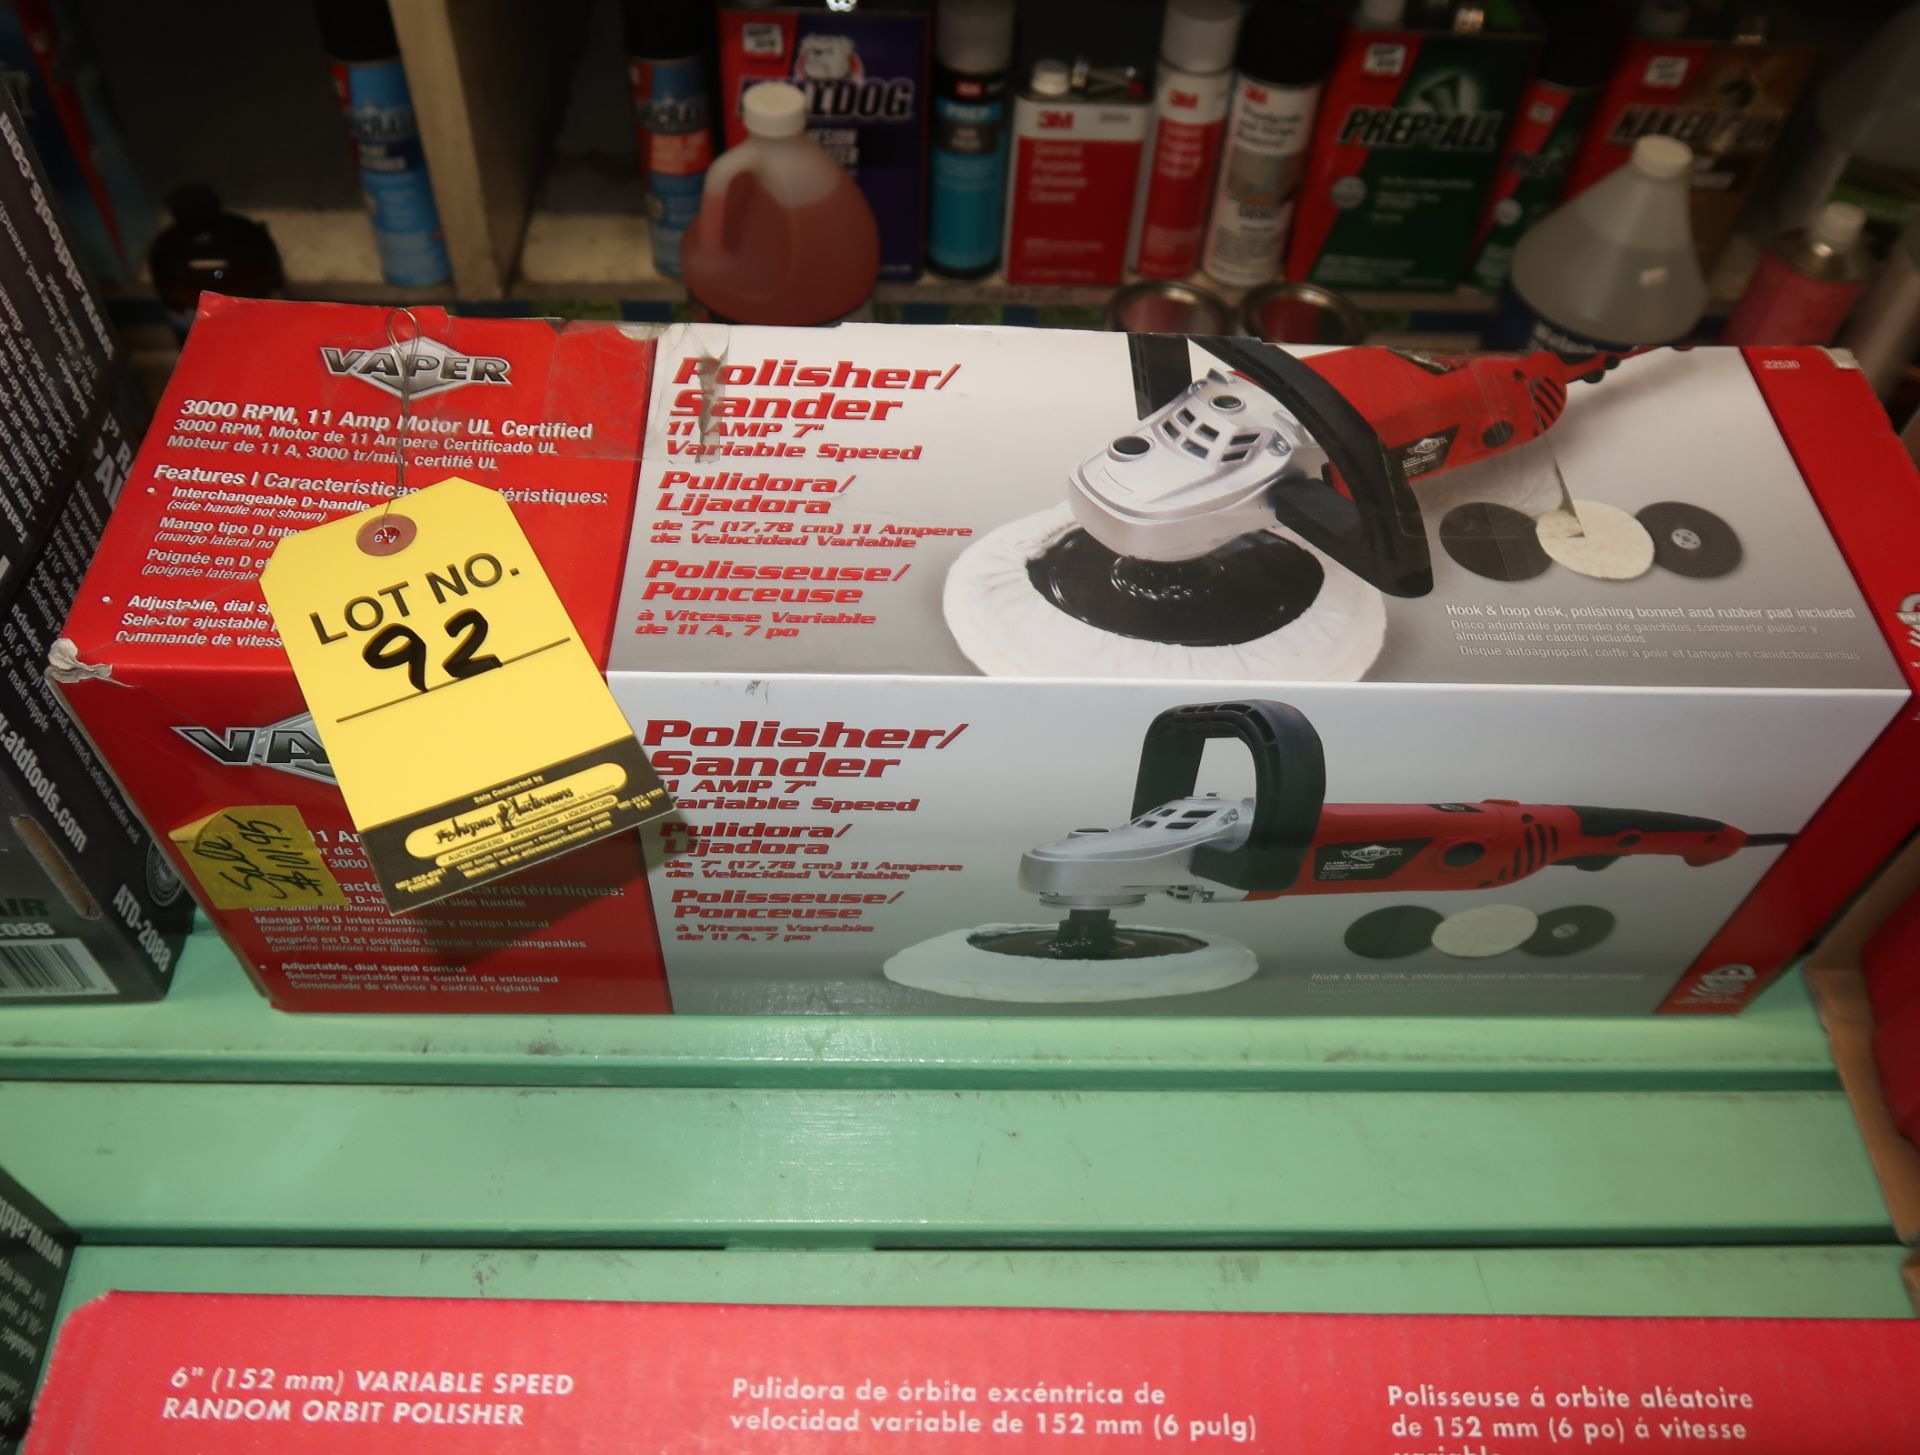 VAPER 11AMP 7" VARIABLE SPEED POLISHER/SANDER MDL. 22530 - LOCATED AT 1933 E. McDOWELL RD. PHOENIX,